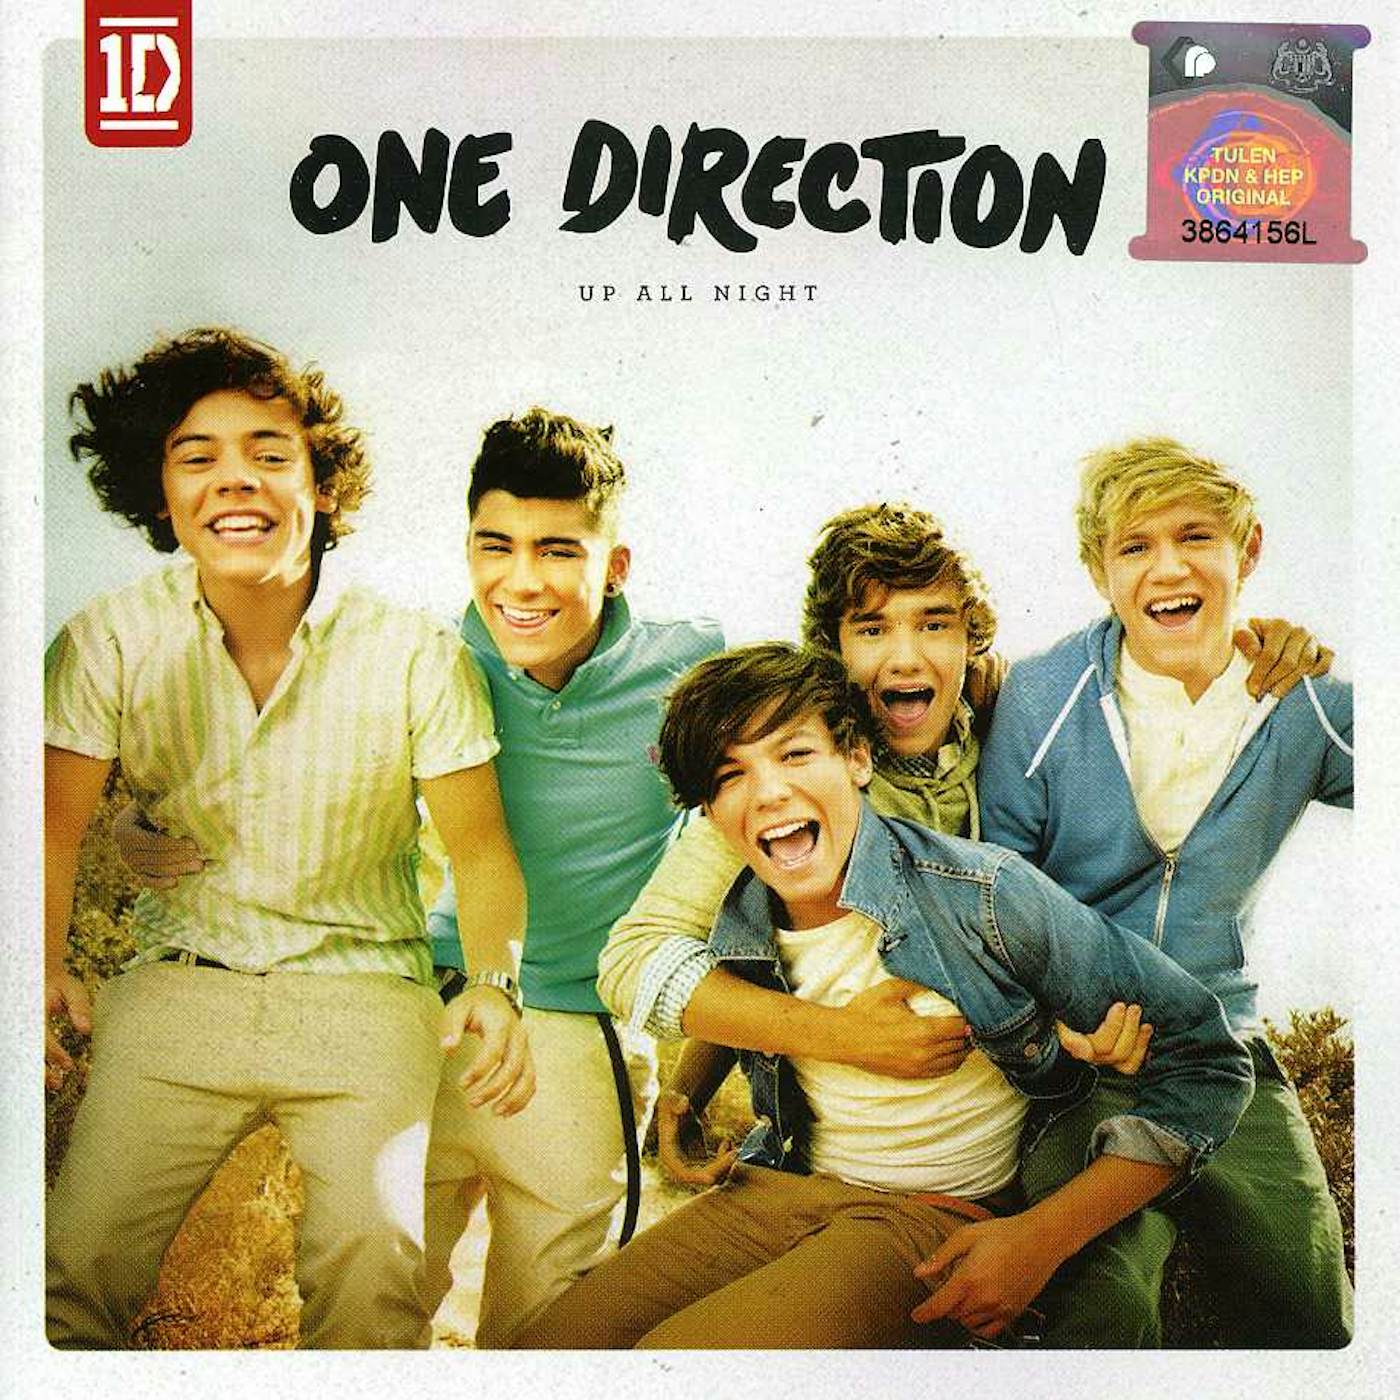 One Direction UP ALL NIGHT: JEWELCASE CD